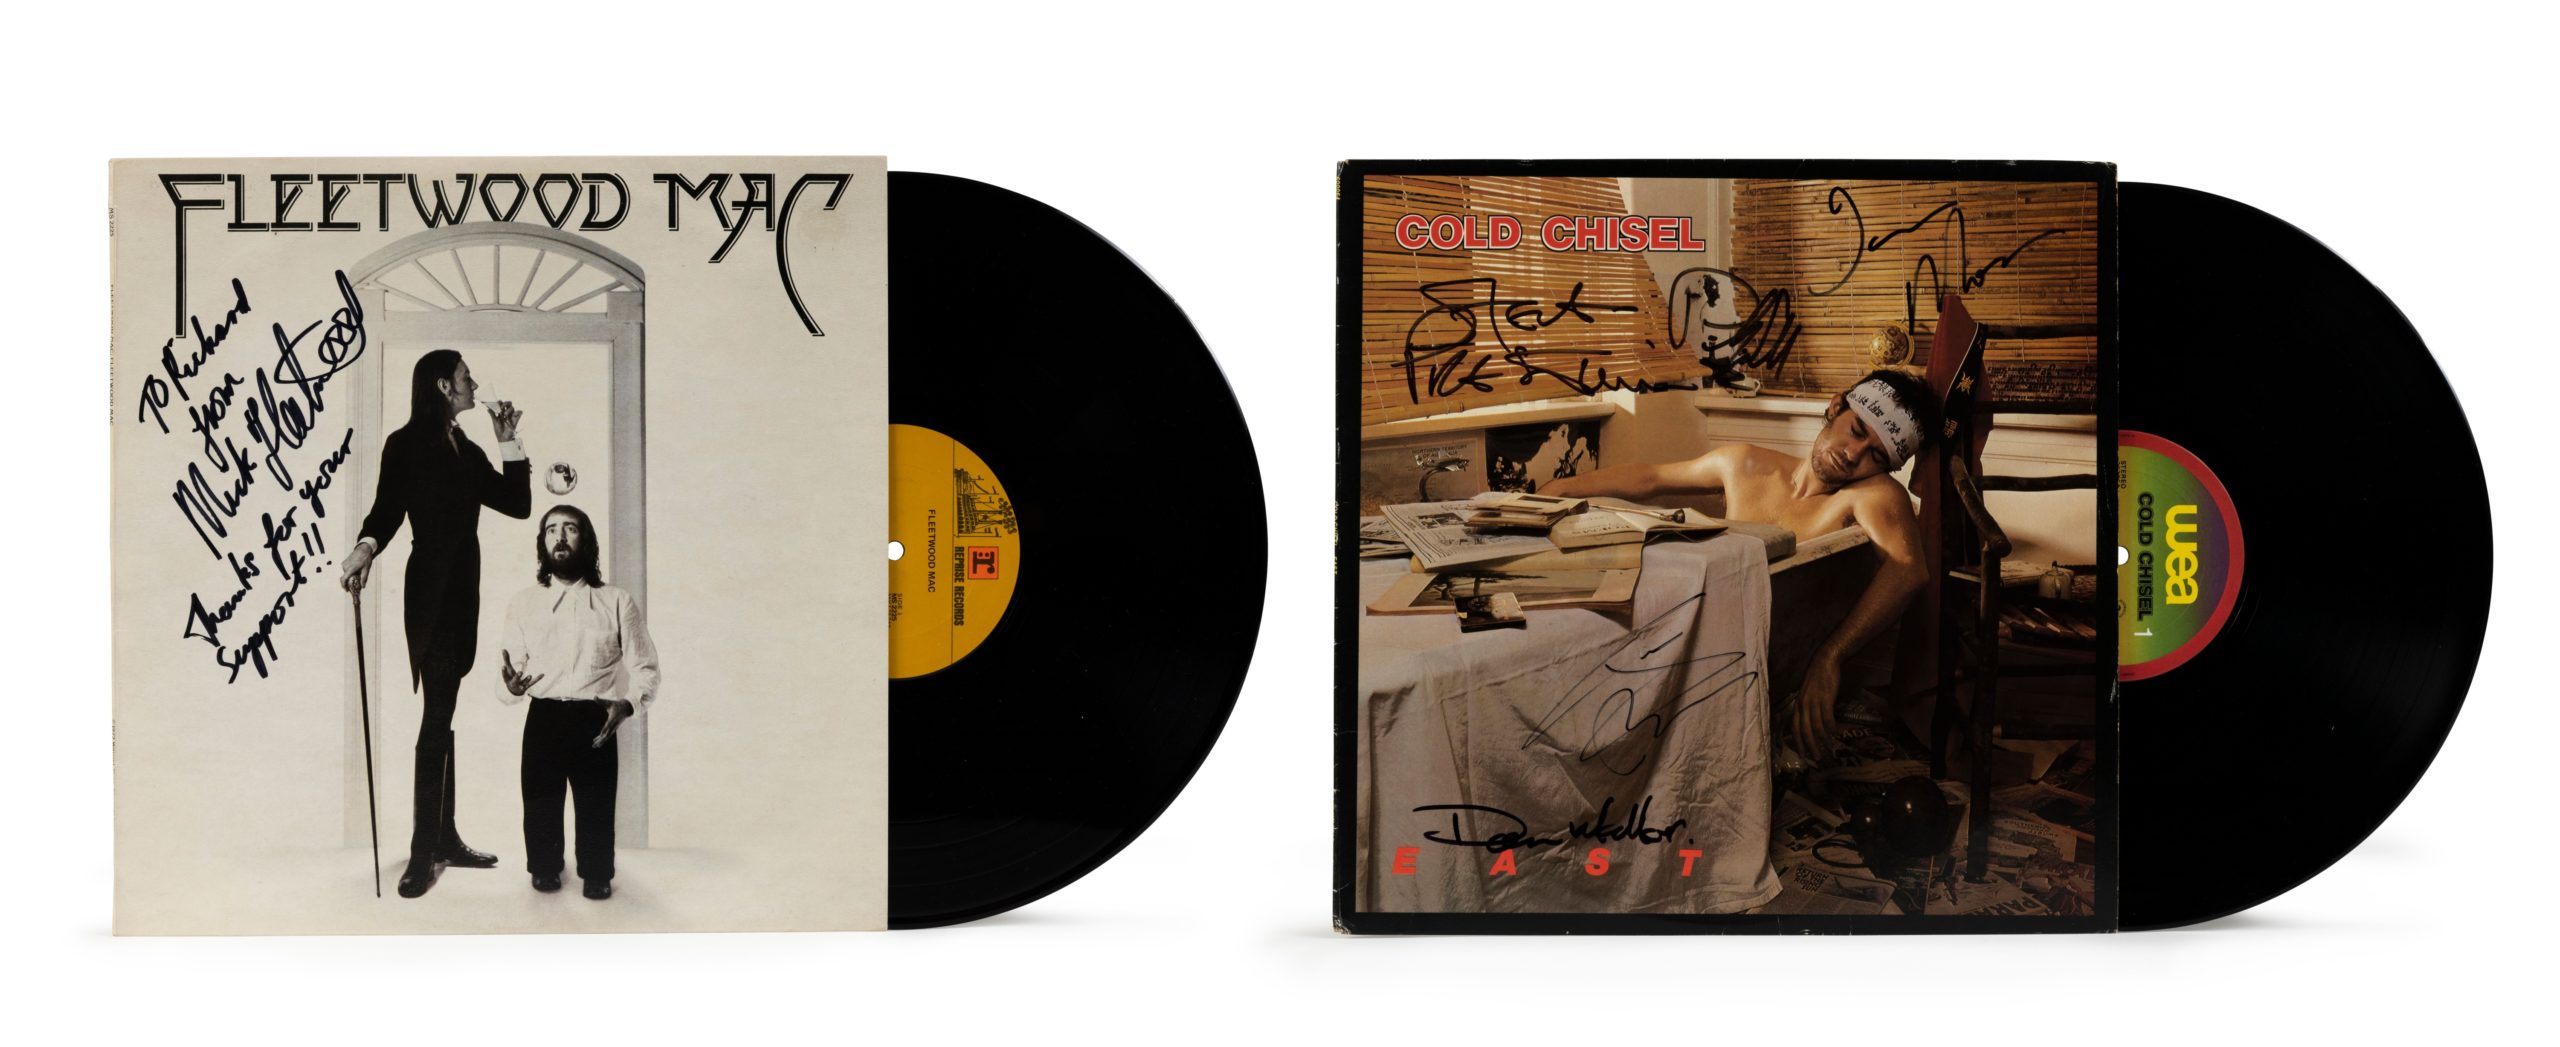 The Autographed Vinyl Record Collection